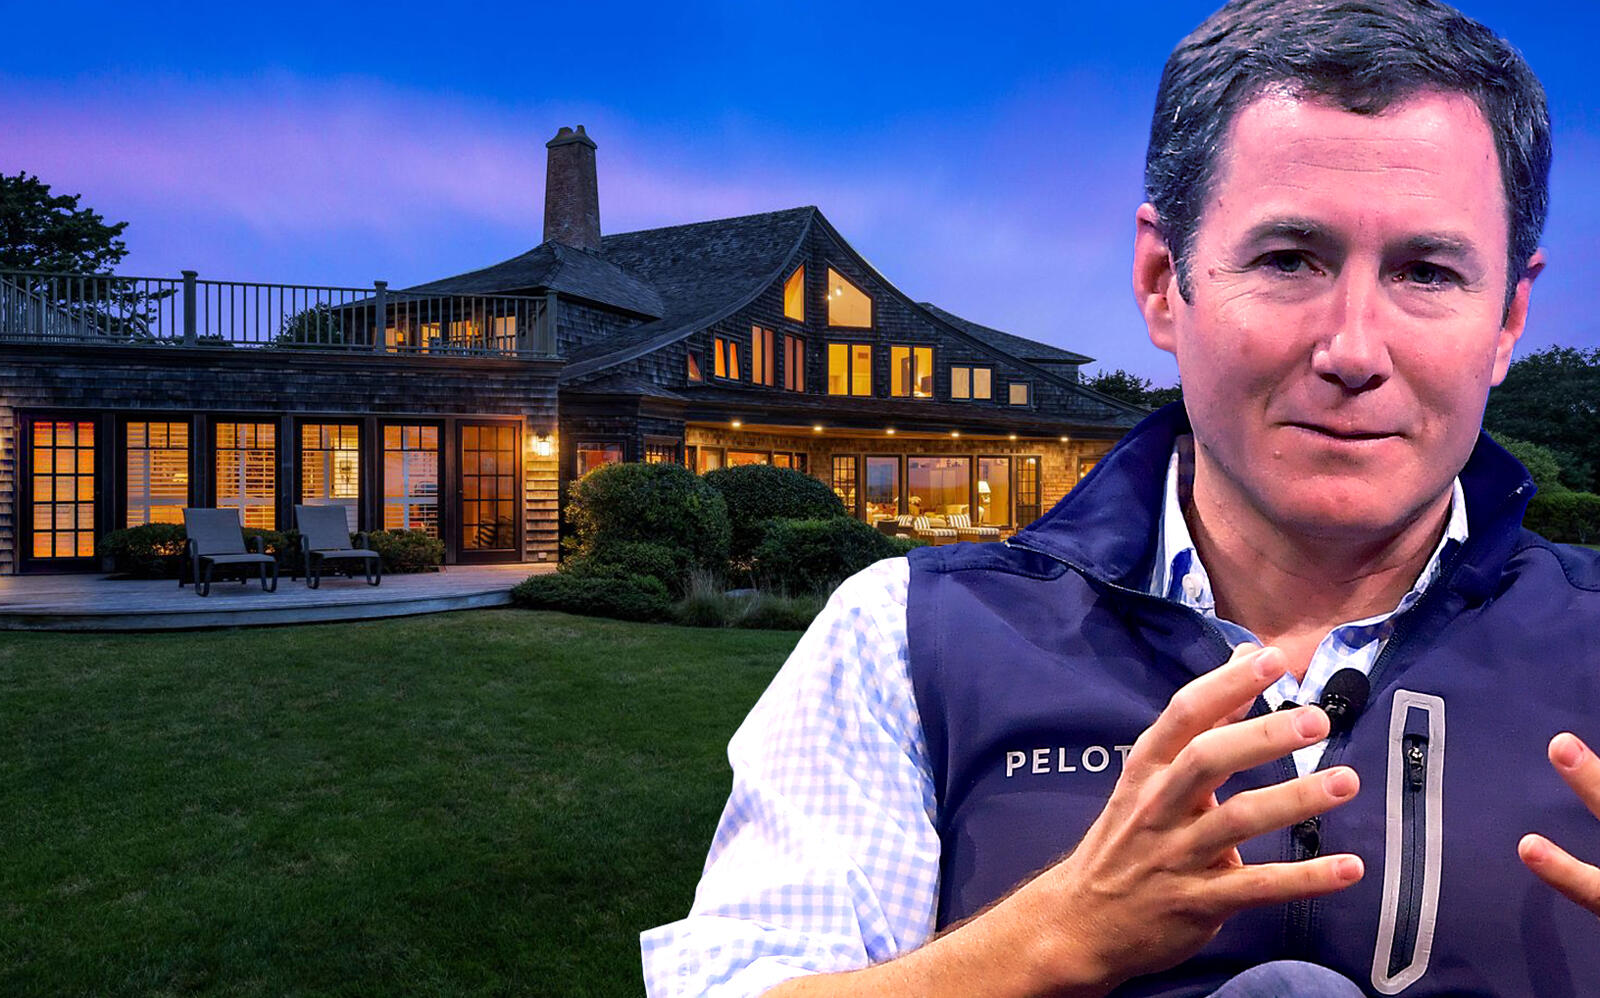 442 Further Lane in East Hampton and Peloton CEO John Foley (Out East, Getty)